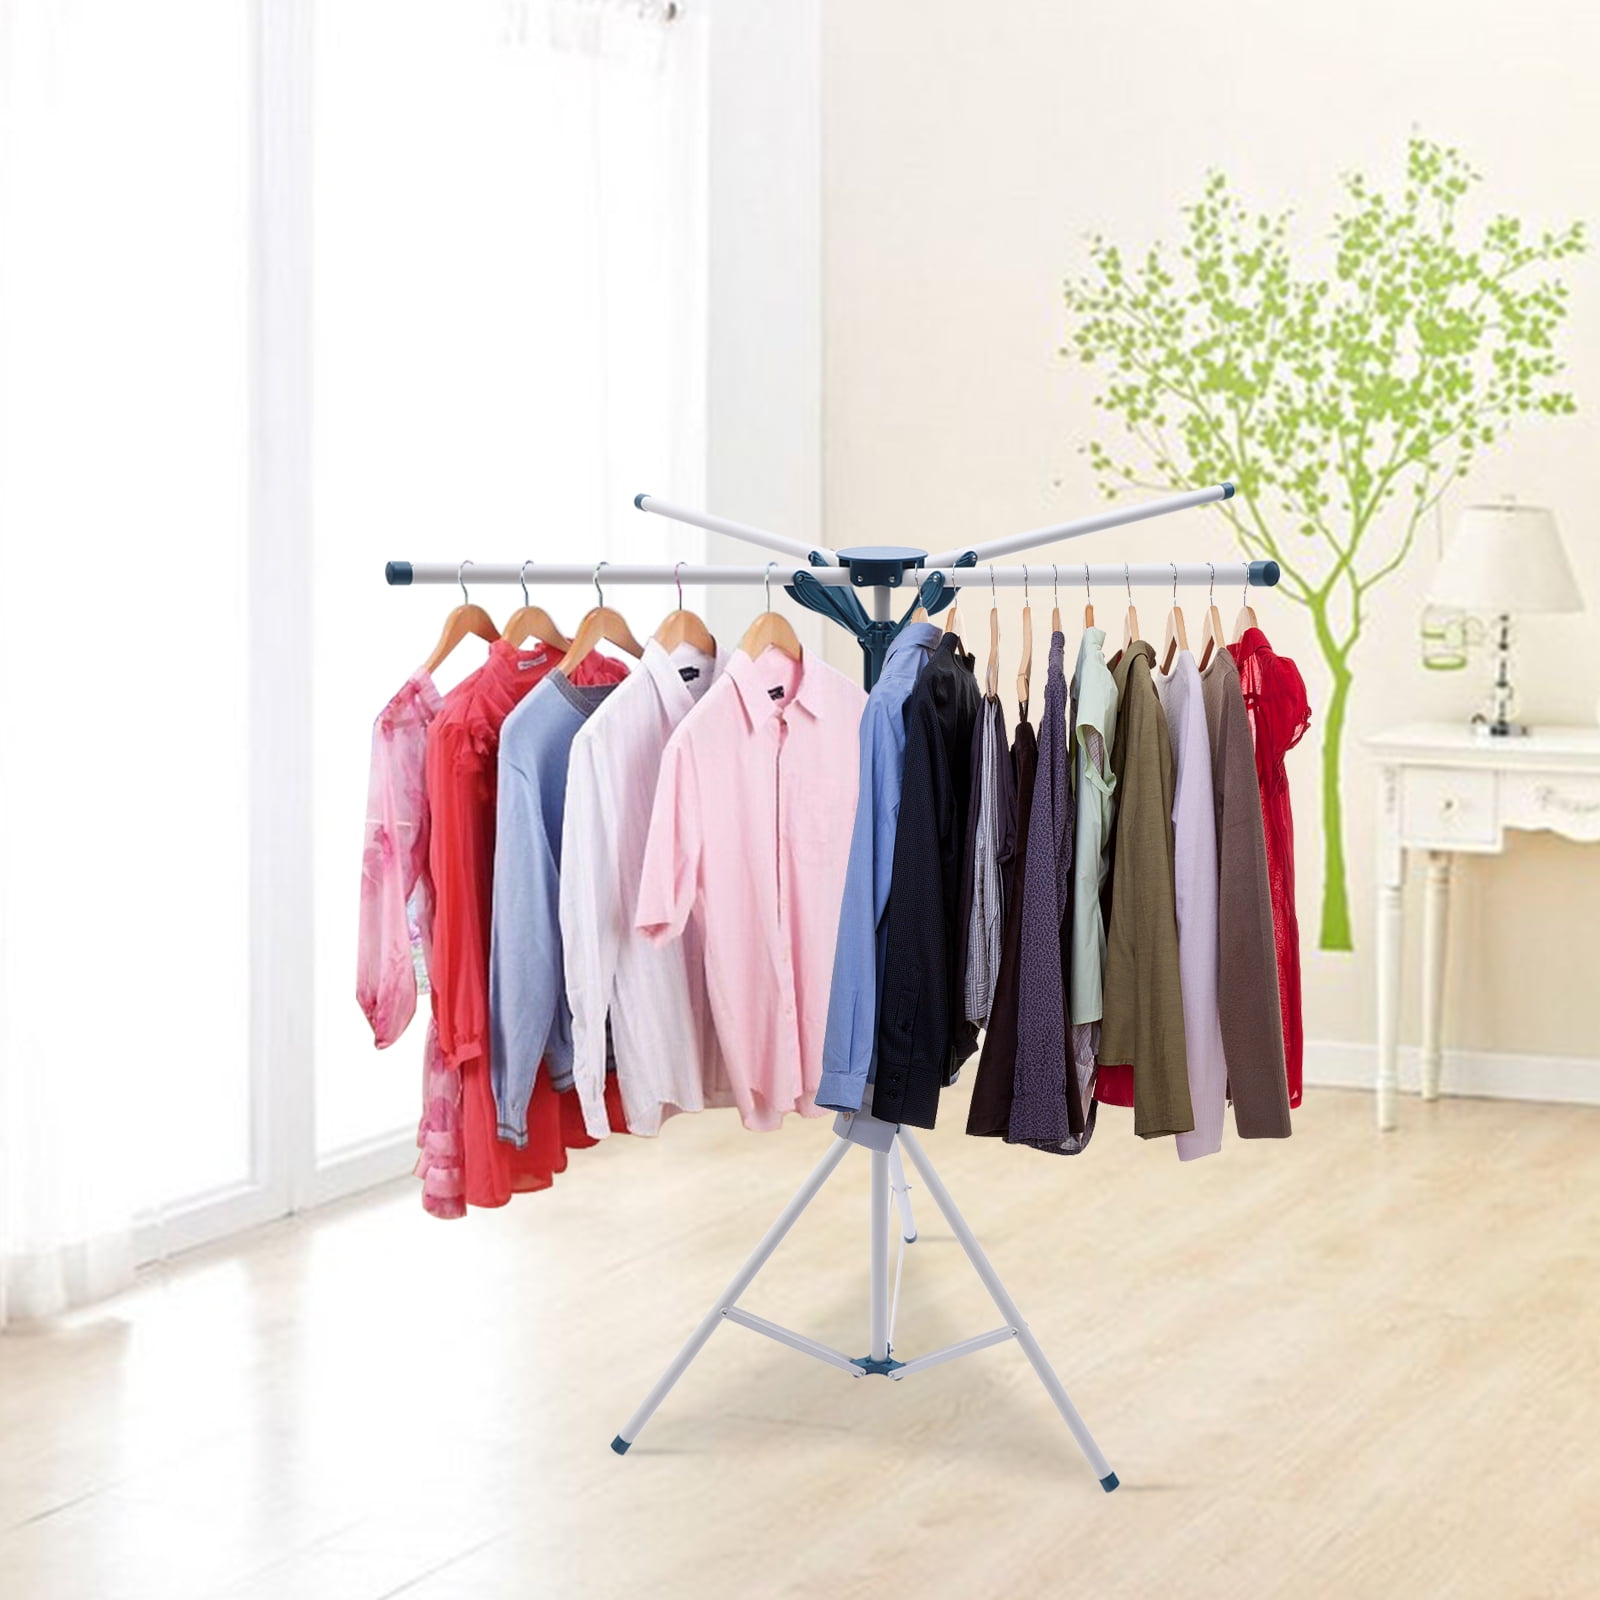 Anqidi Folding Portable Electric Clothes Dryer 2 Layer 3 Gear Timing  Laundry Drying Rack + Remote 1500W